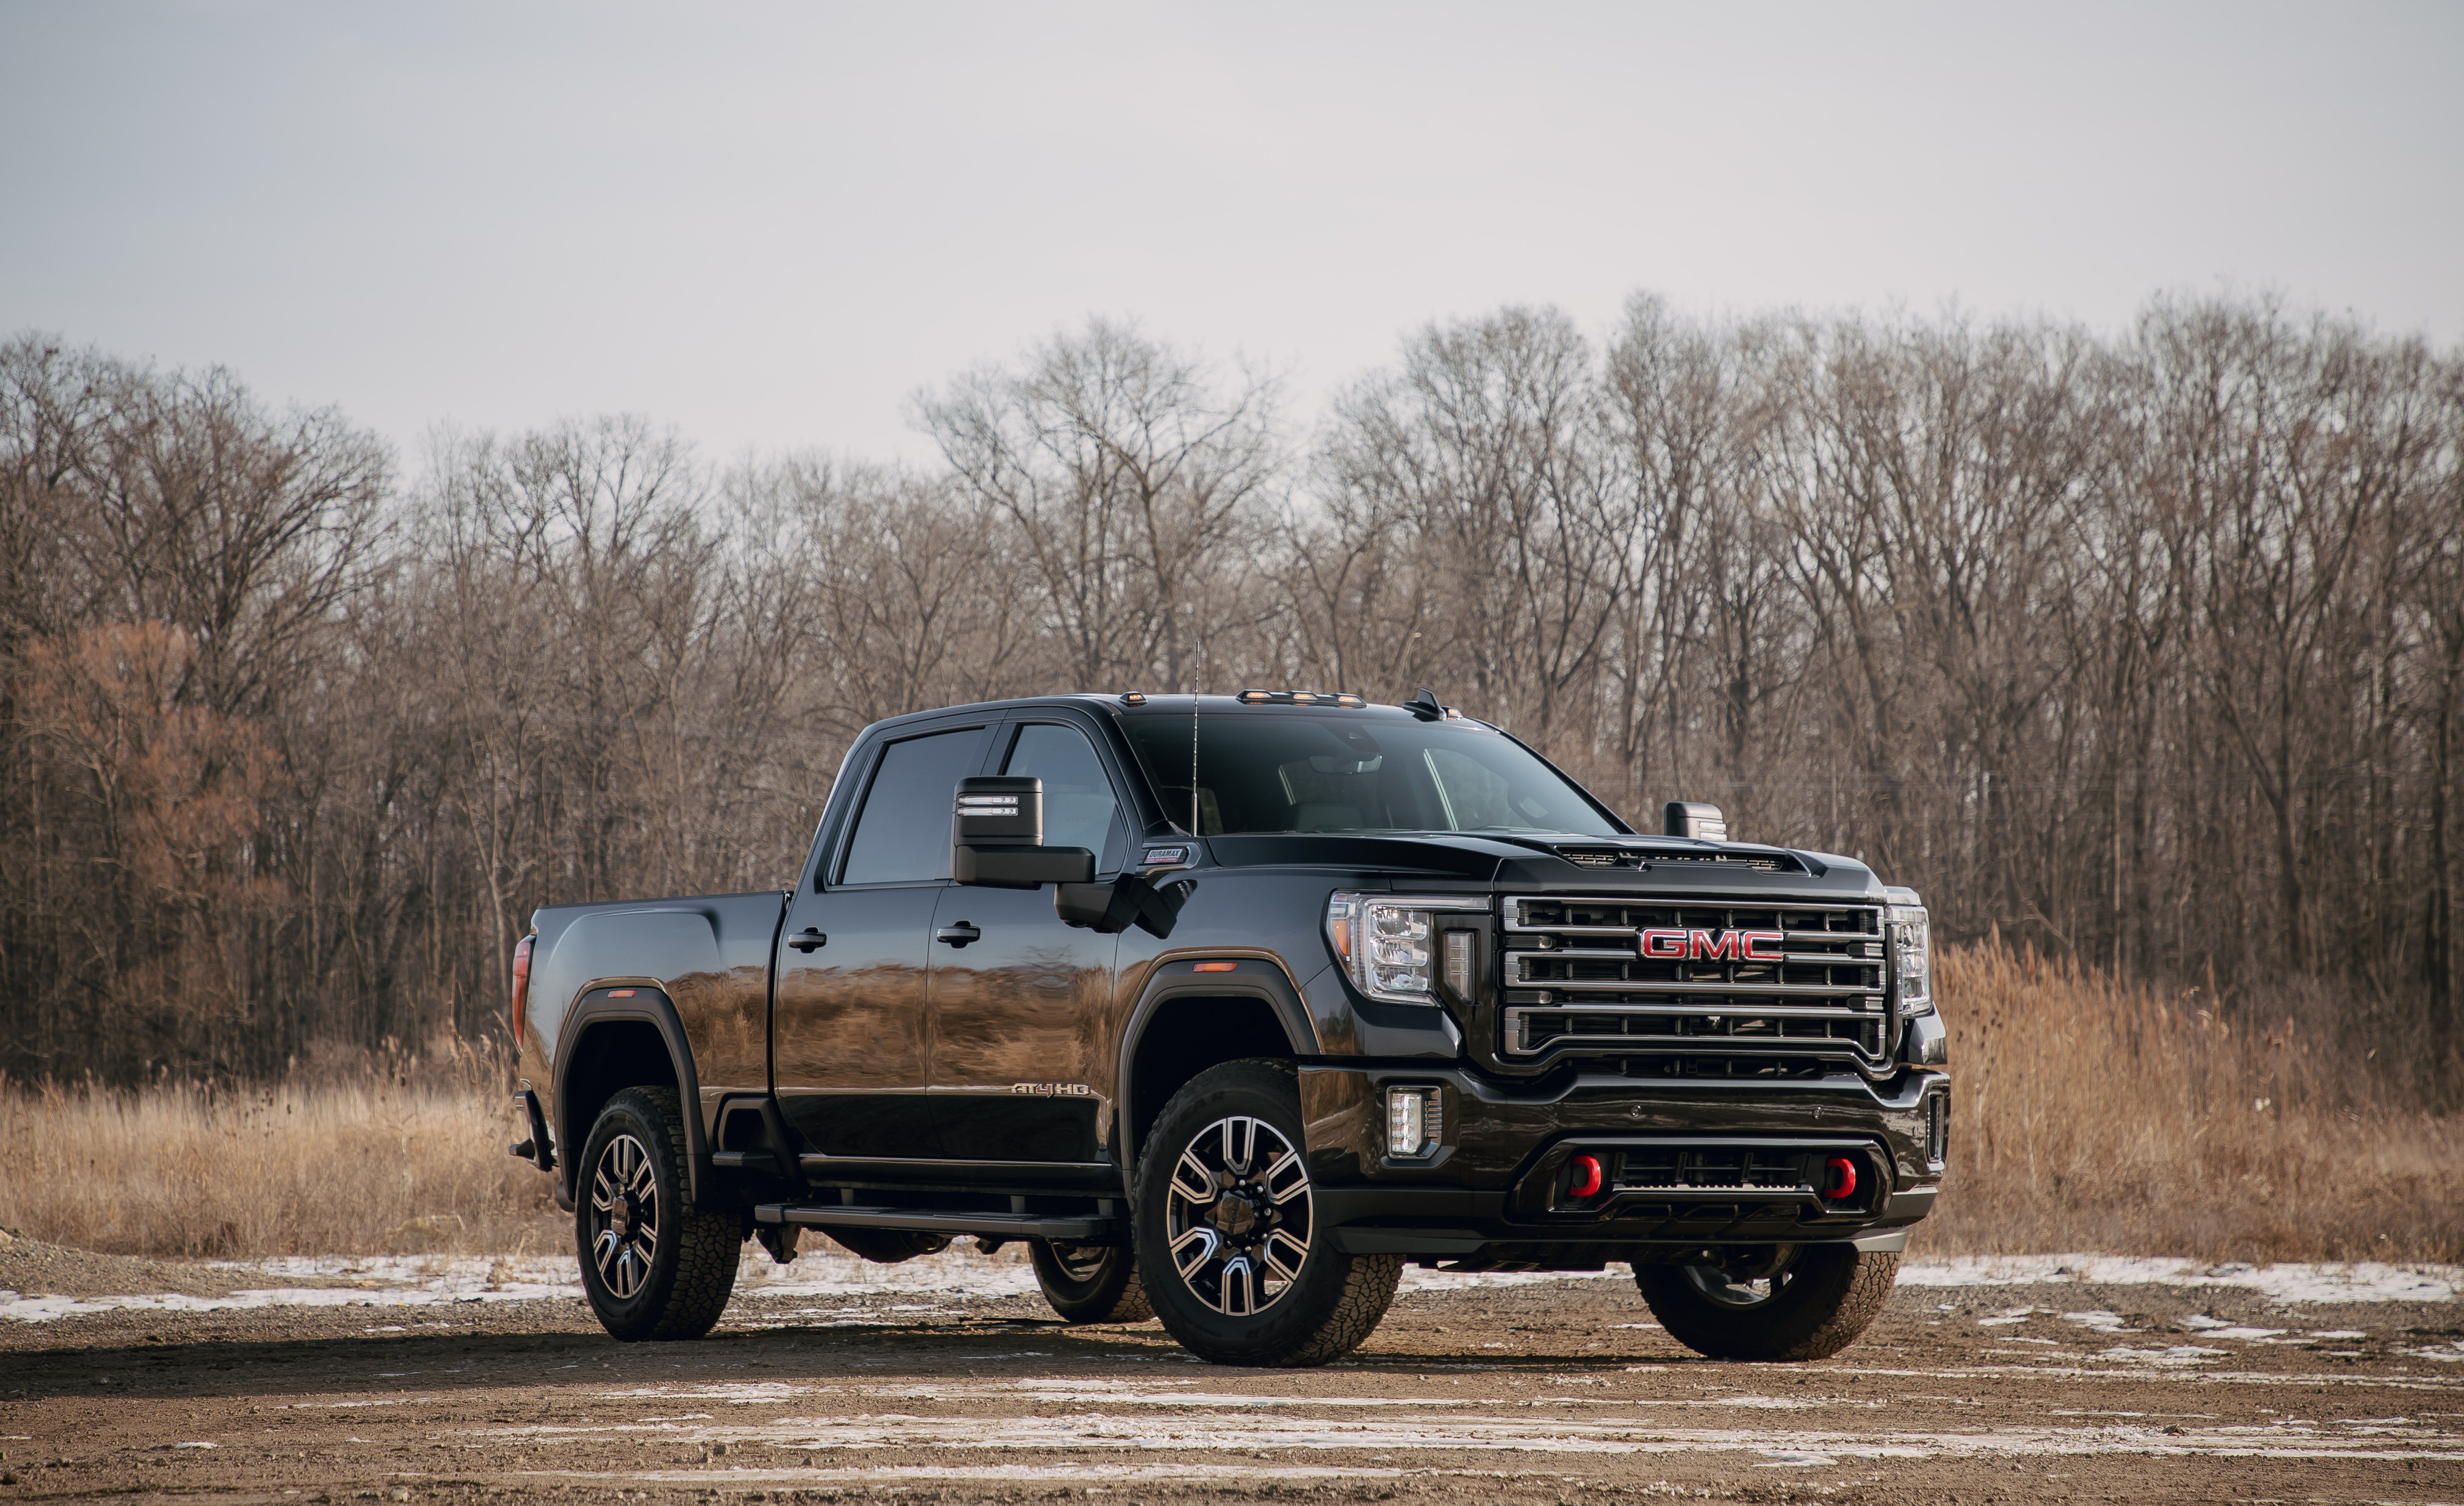 Gmc Sierra Hd Features And Specs